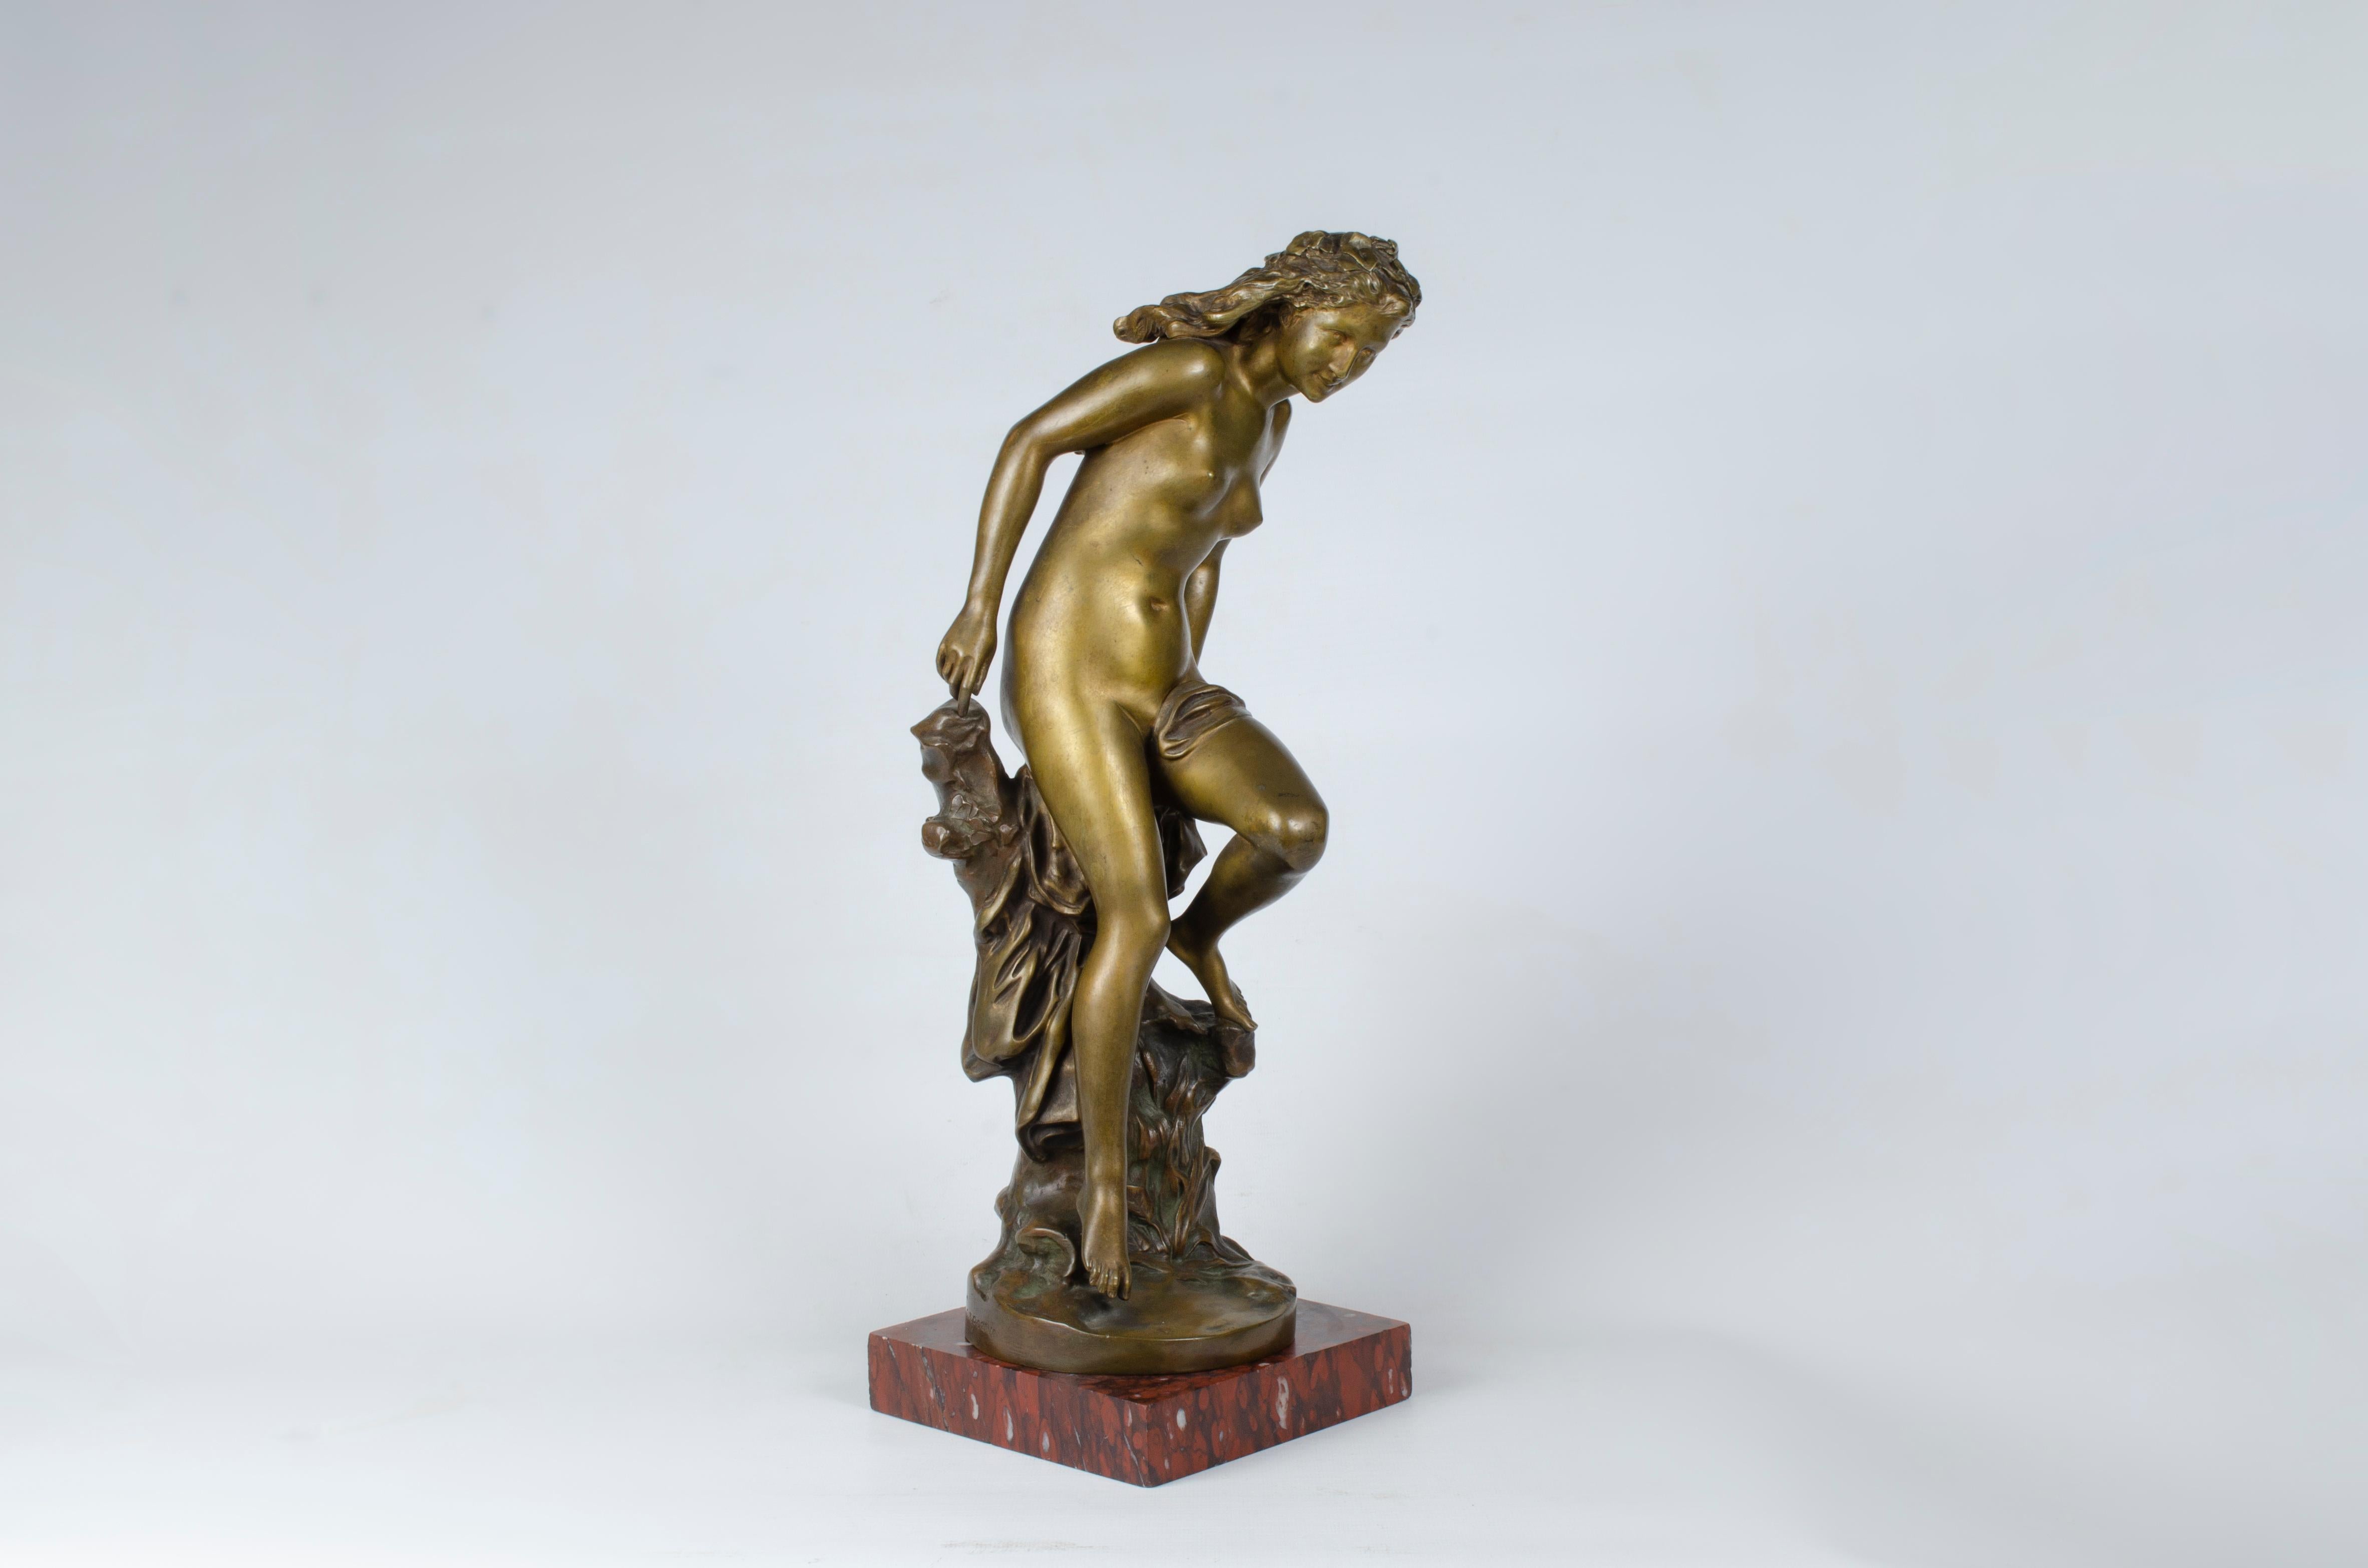 Sculpture “La Frileuse” by Jean-Baptiste Carpeaux (1827-1875). It is made of gilded bronze supported on a red marble base. Signed JB Carpeaux, P B, Susse Frères, Editeuns Paris, Susse Fres, Ed ts Paris.

France, CIRCA 1860.